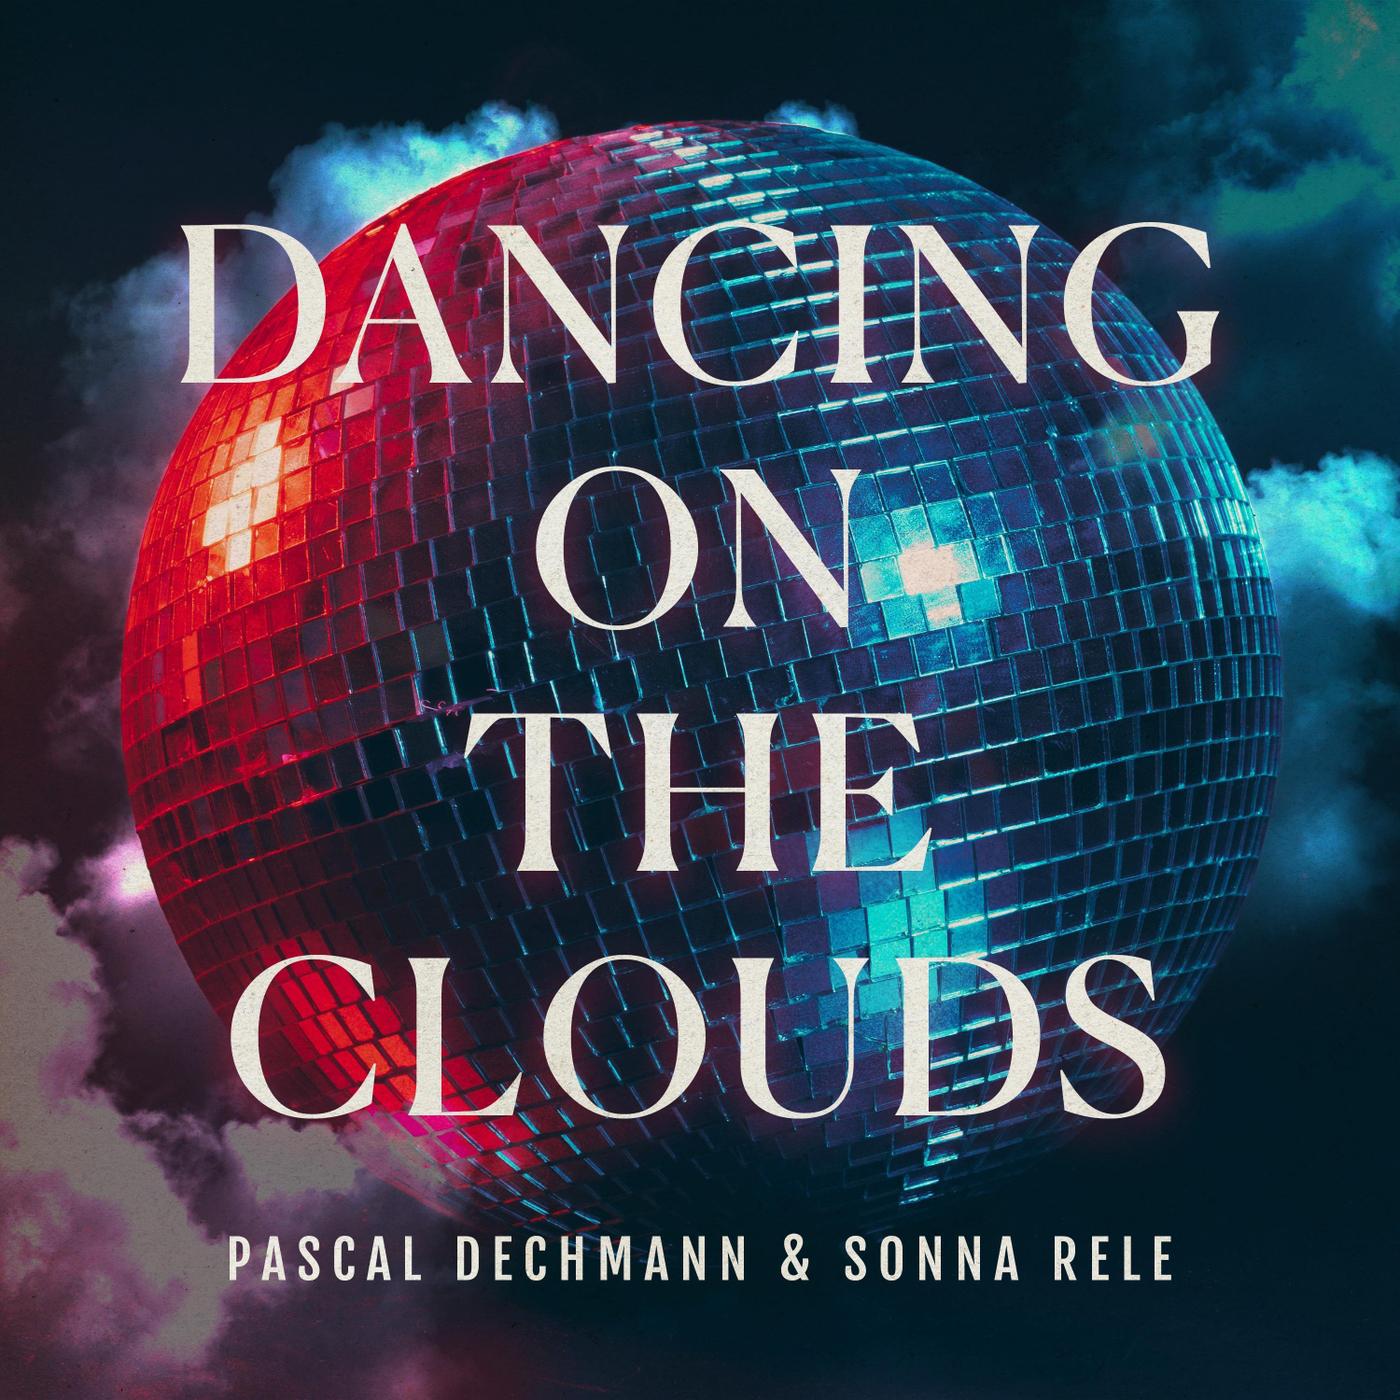 Pascal Dechmann - Dancing on the Clouds